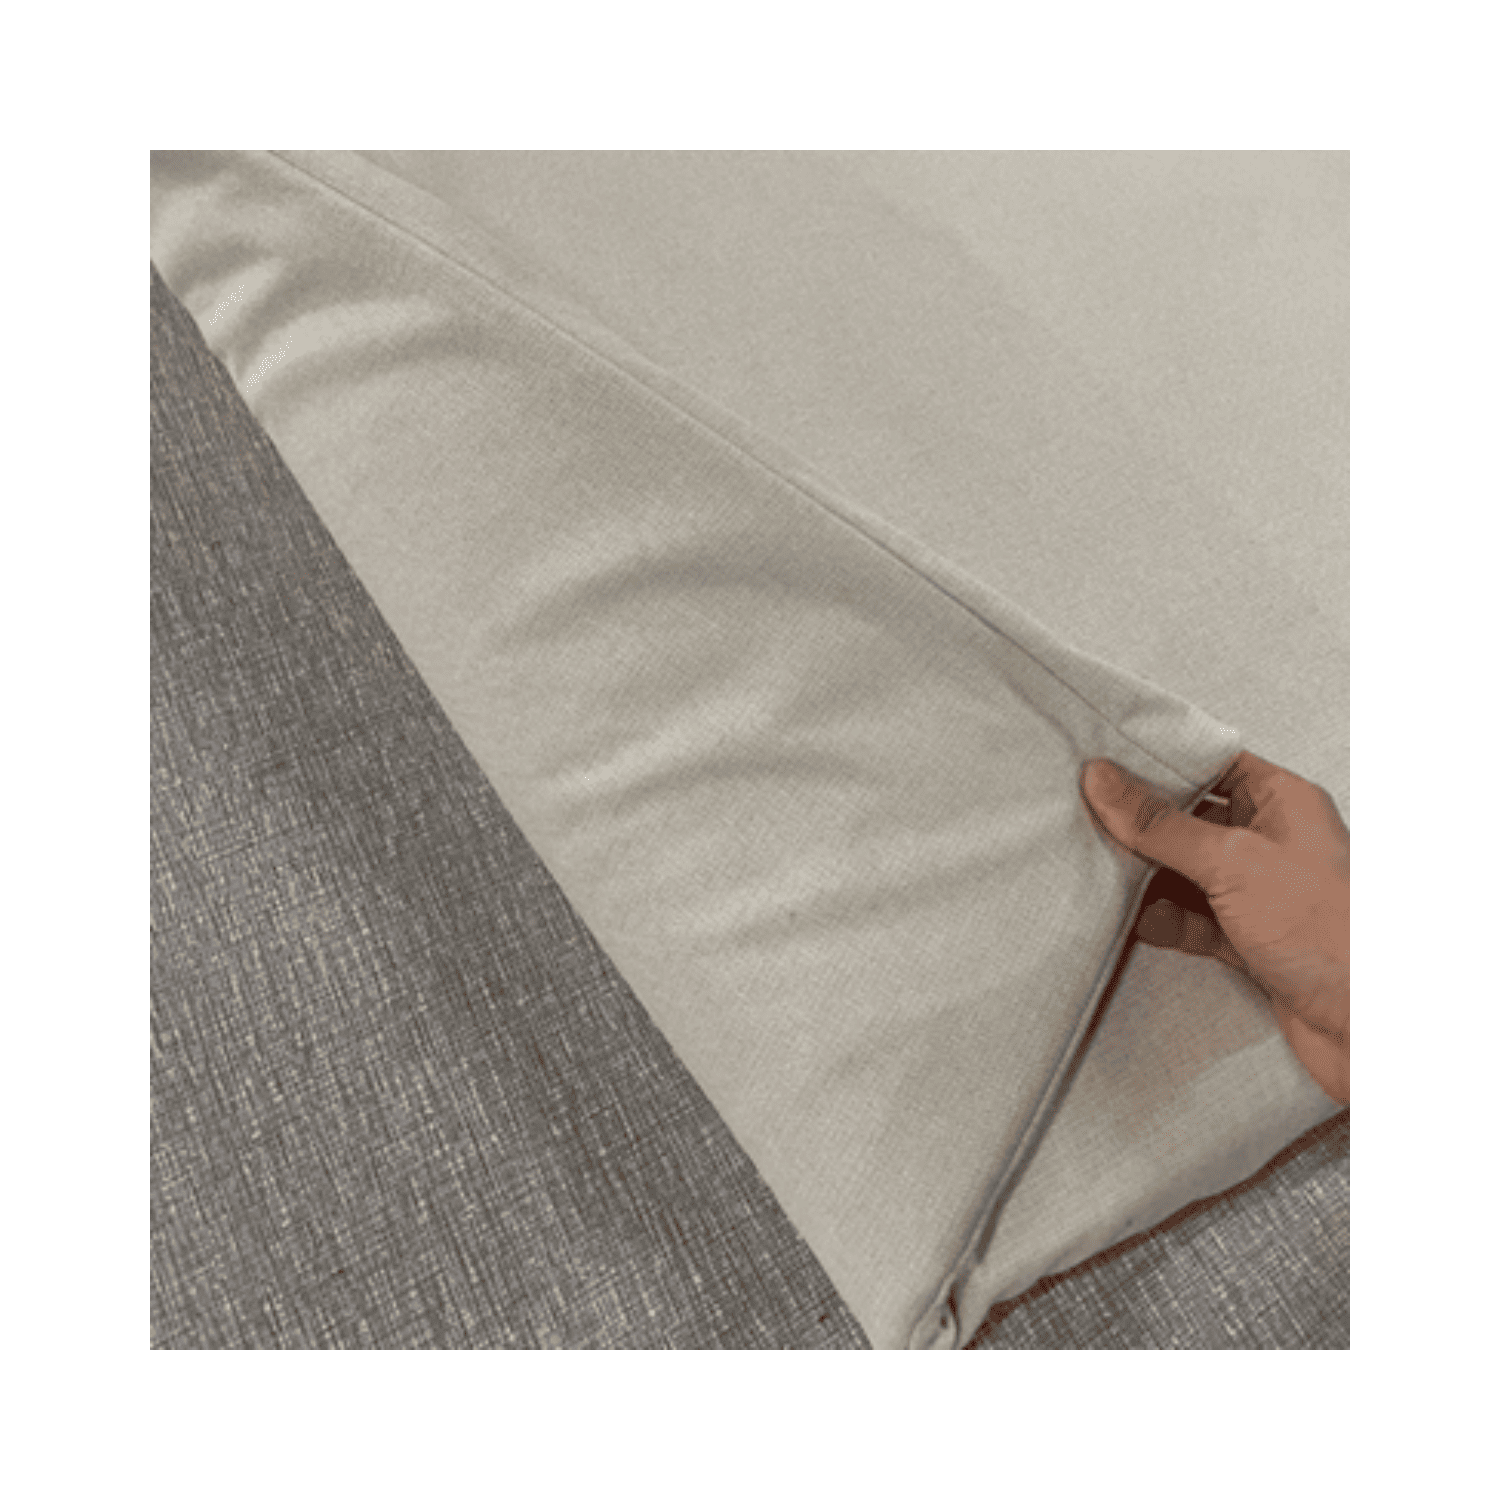 Interchangeable Beige Fabric Cover